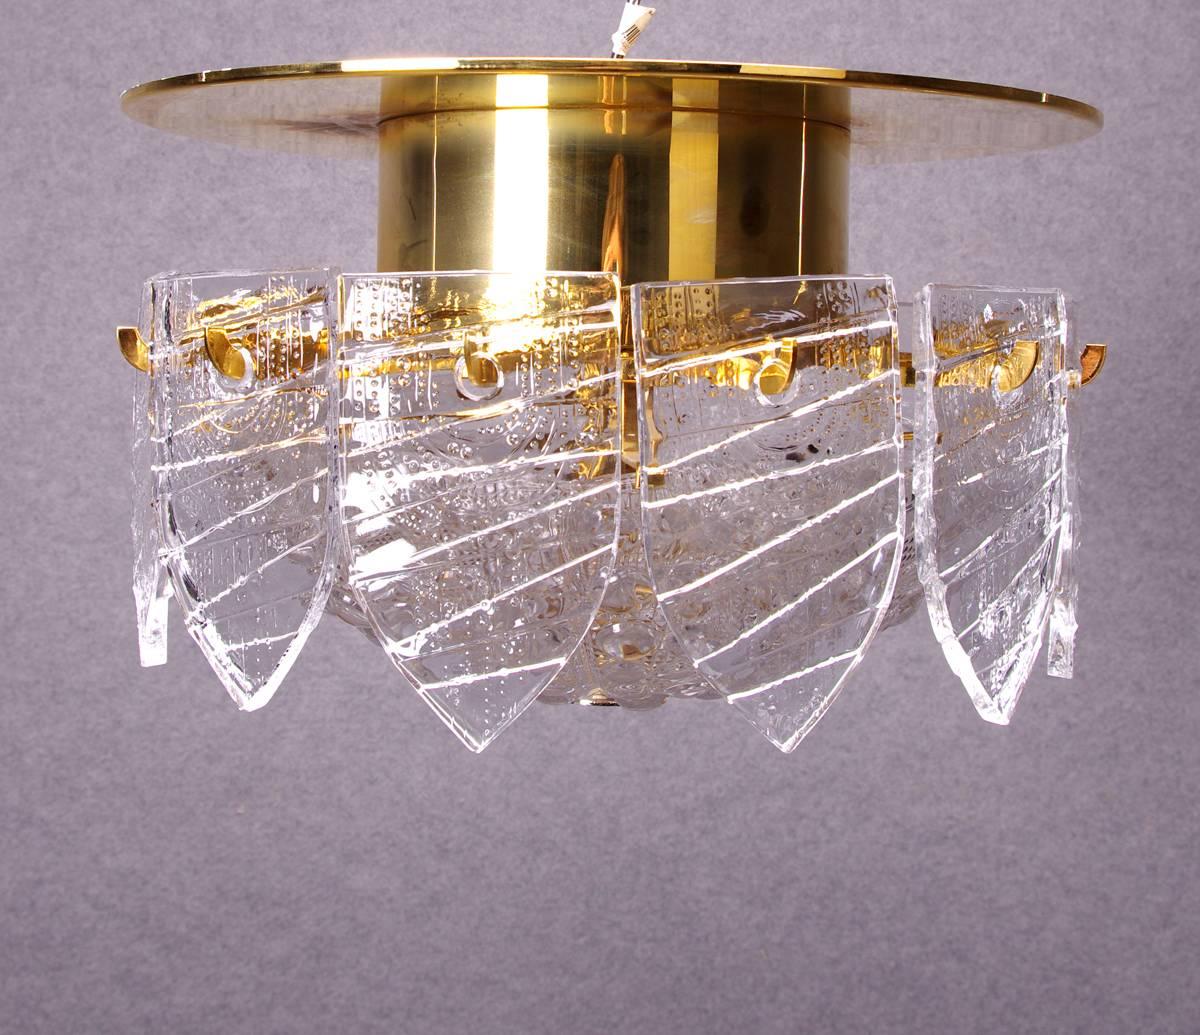 Large and rare ceiling light designed by Gunnar Cyren for Orrefors, Sweden, circa 1960s. Gunnar Cyren collaborated with Orrefors for 1959-1970.
Handmade glass pieces has some variation in thickness. The metal parts probably gold-plated.
Existing